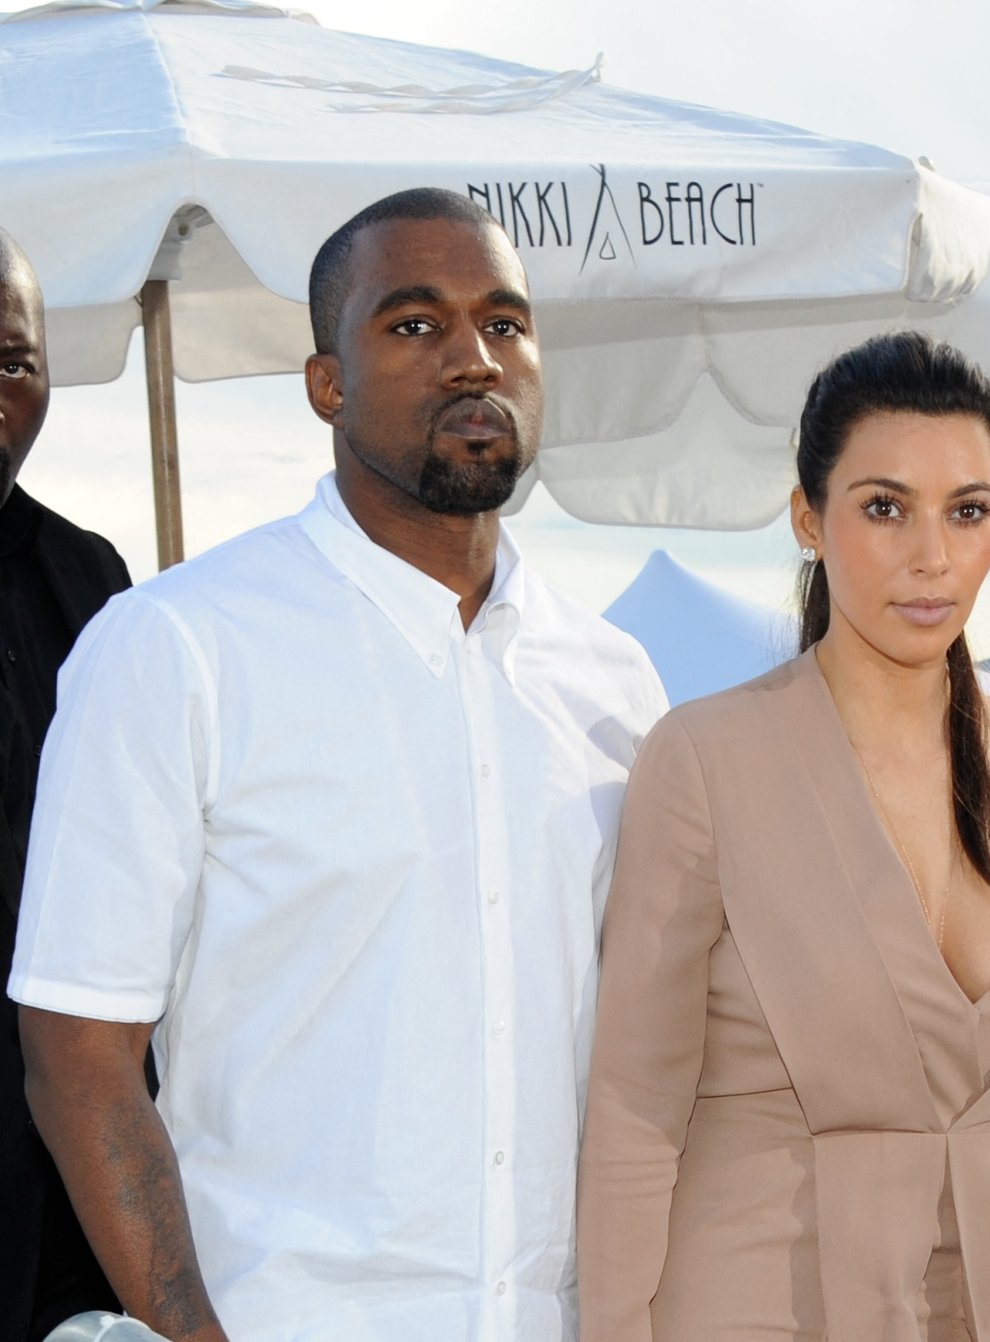 Kanye and Kim married in 2014 and have four children together